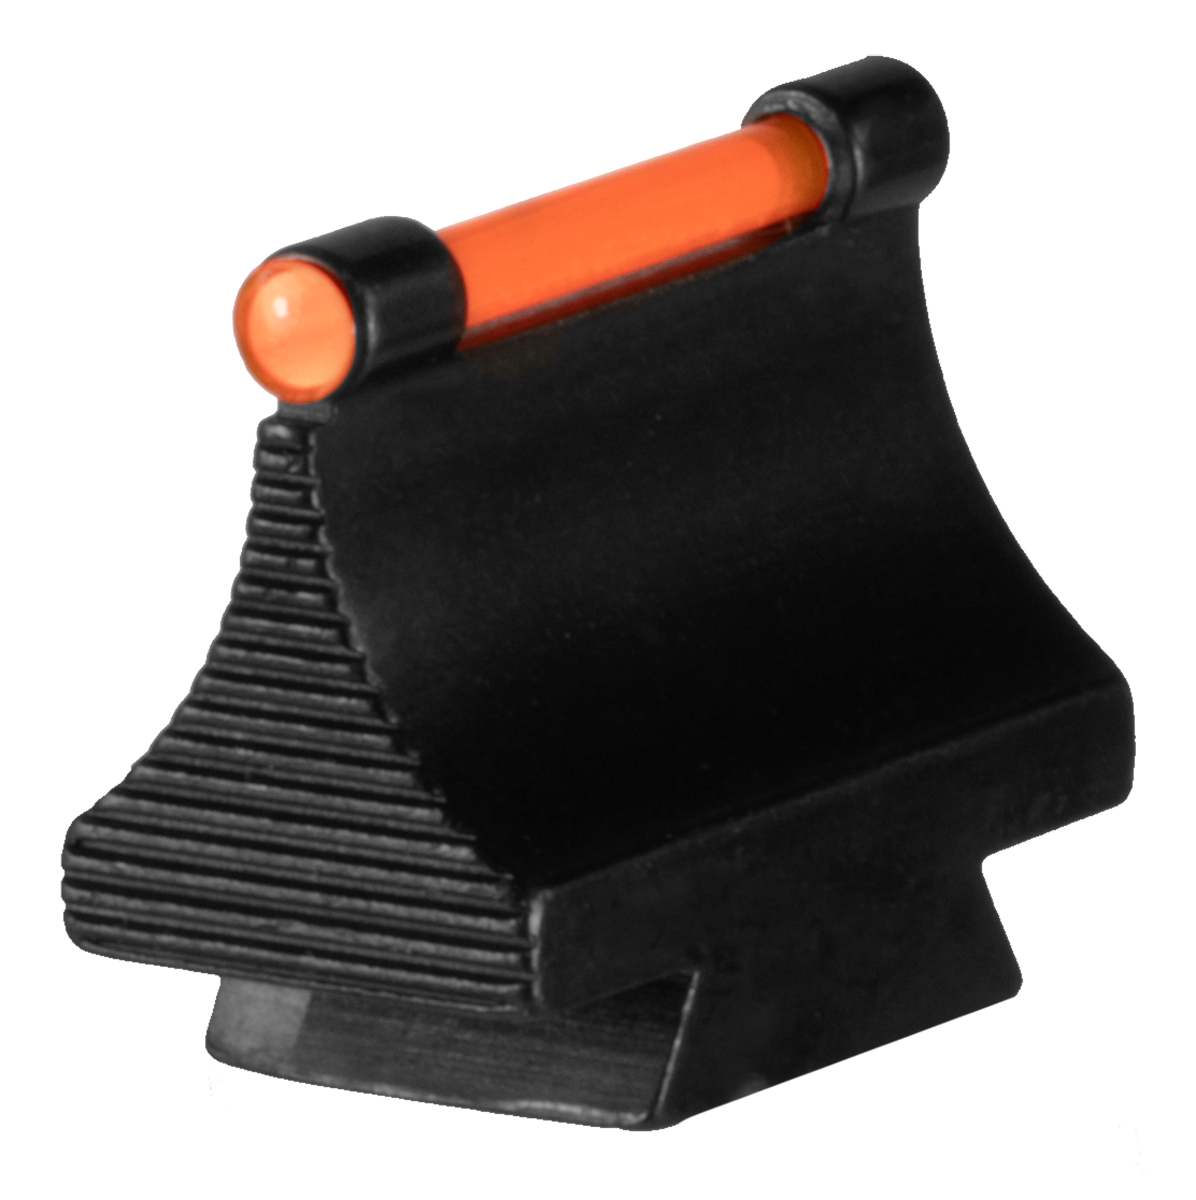 Truglo 3/8" Dovetail Front Sight, Tru Tg-tg95530rr  3/8" Dovetail Front Sight Red